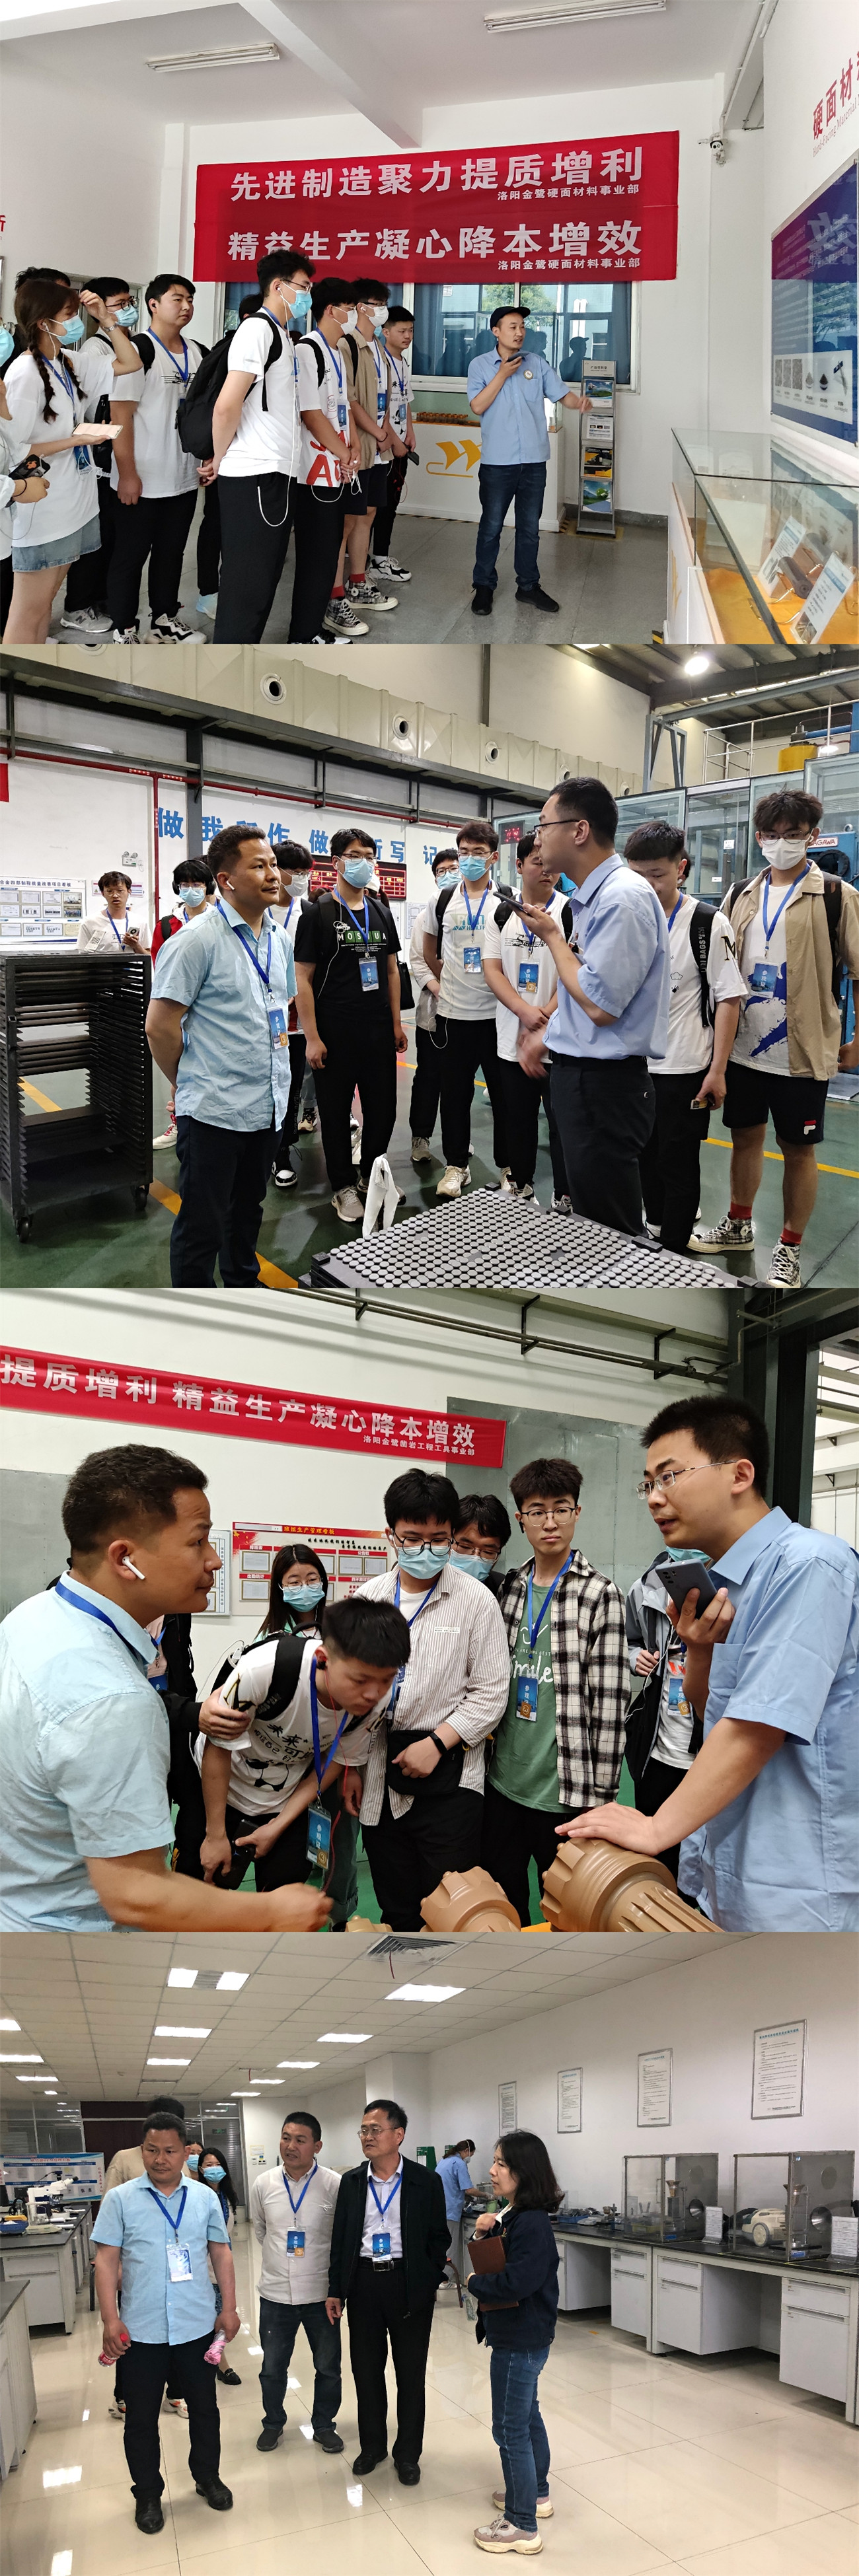 Teachers and students from the School of Materials Science and Engineering of Zhengzhou University visited our company for exchange